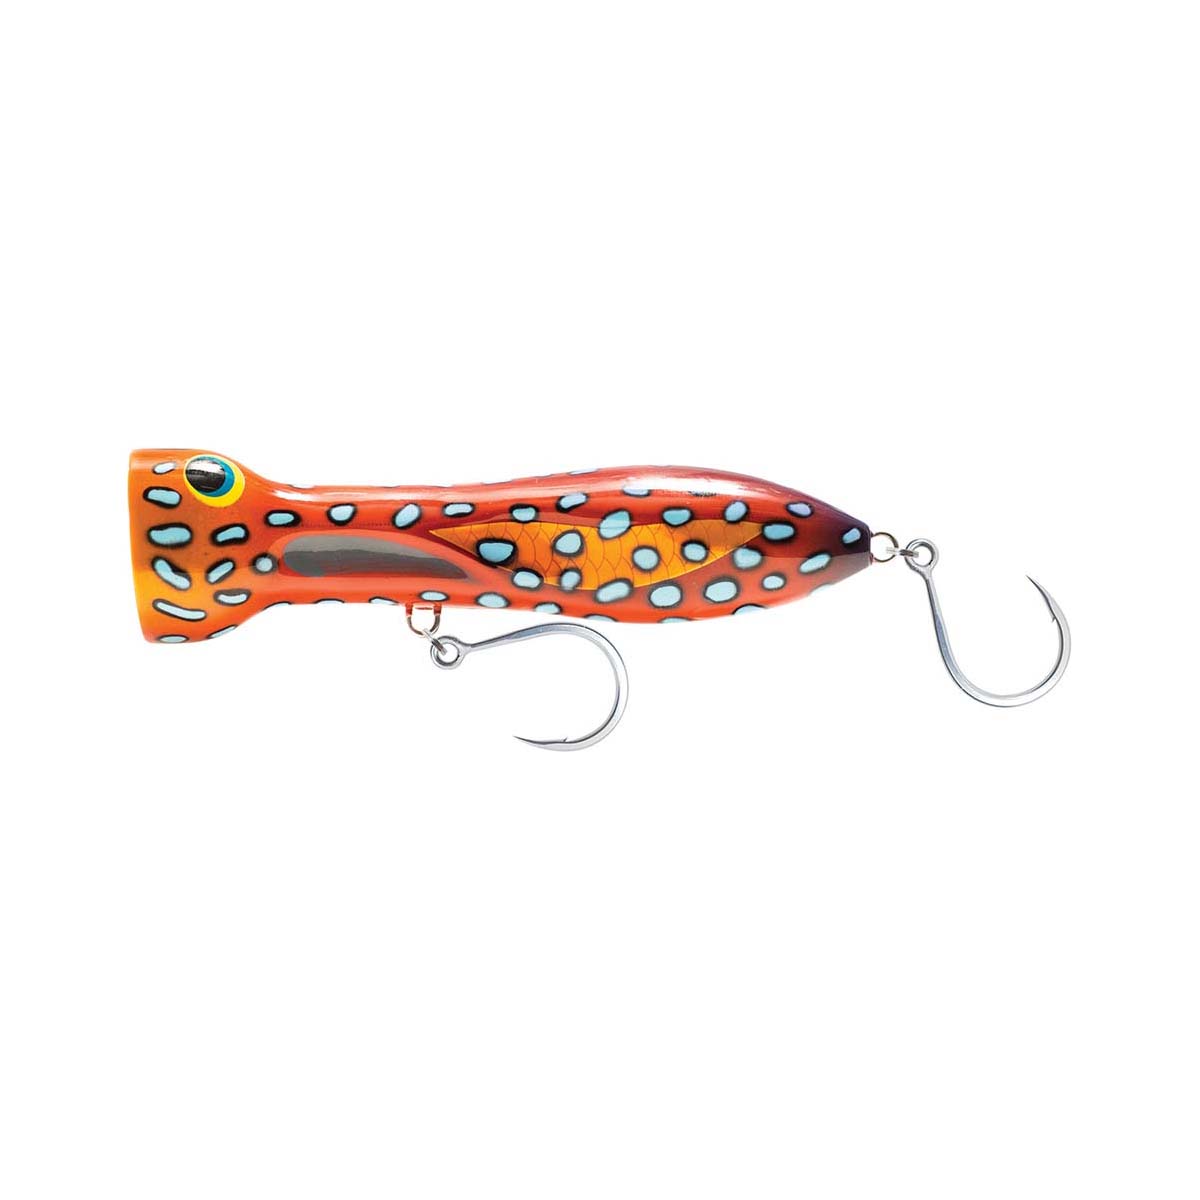 Nomad Chug Norris Surface Popper Lure 15cm Coral Trout